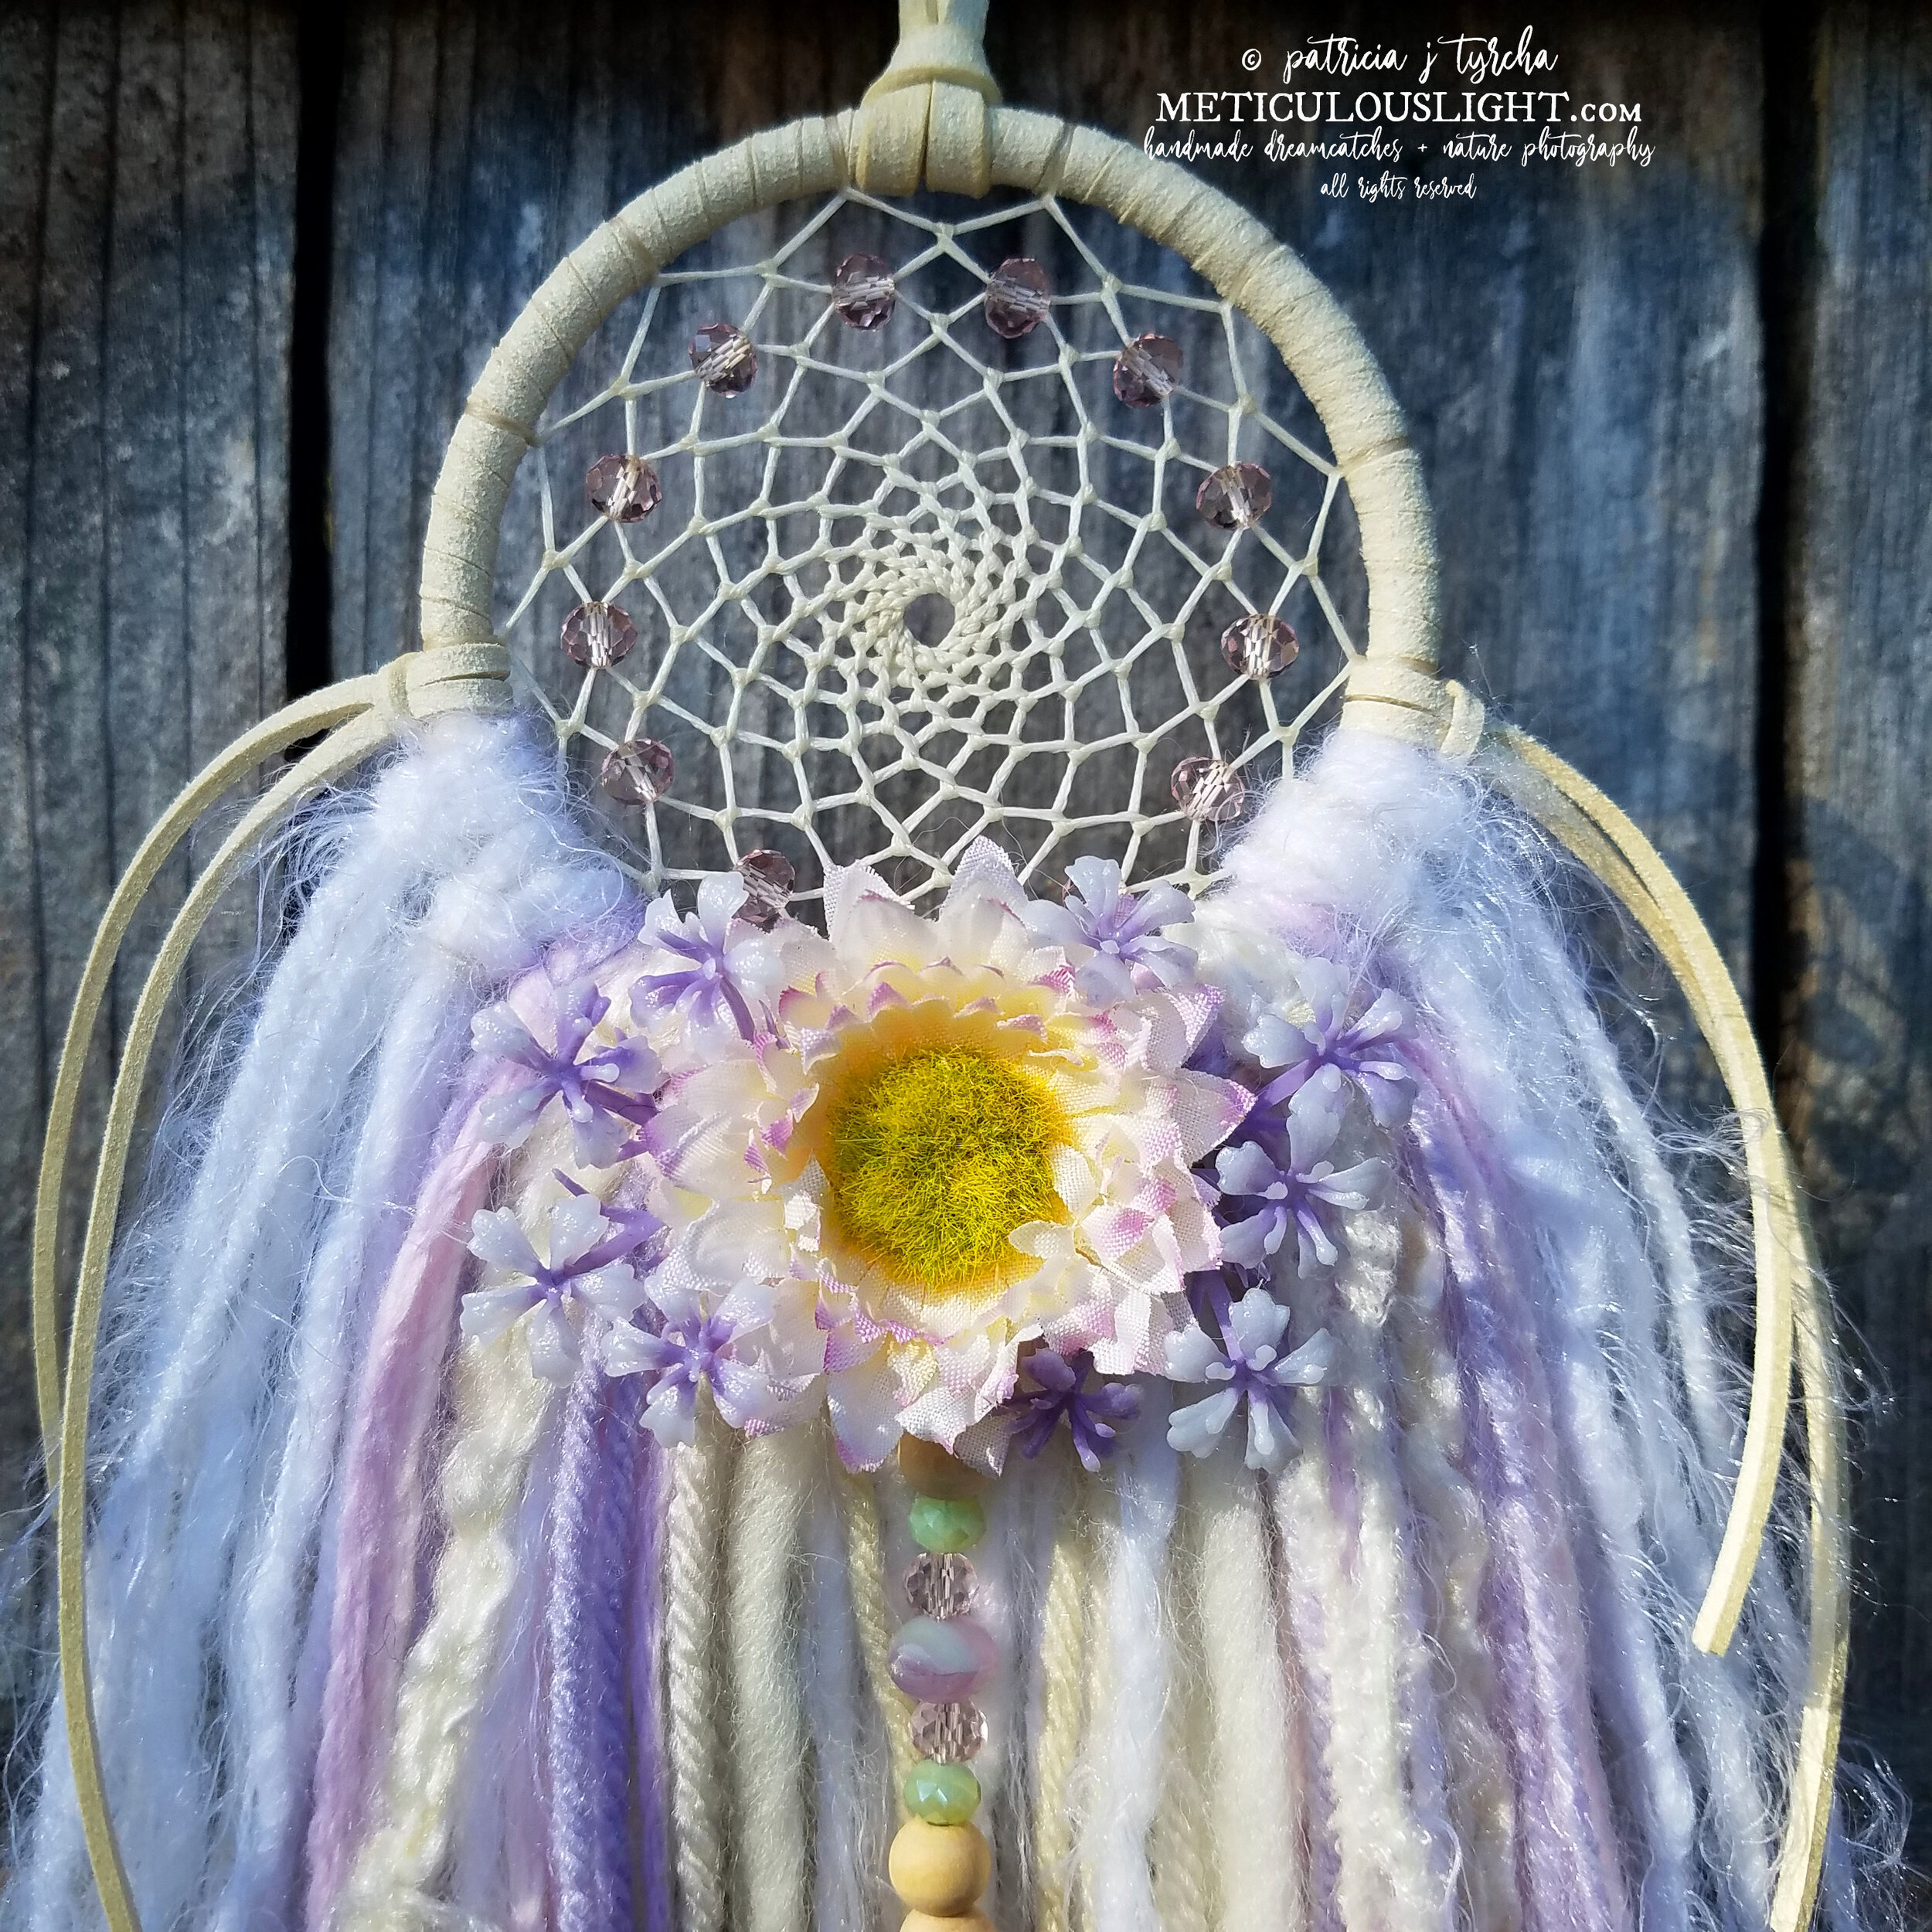 © patricia j tyrcha Pink + Purple Dream Catcher with little flowers, yarn, beads, crystals ALL RIGHTS RESERVED METICULOUSLIGHT 7w.jpg